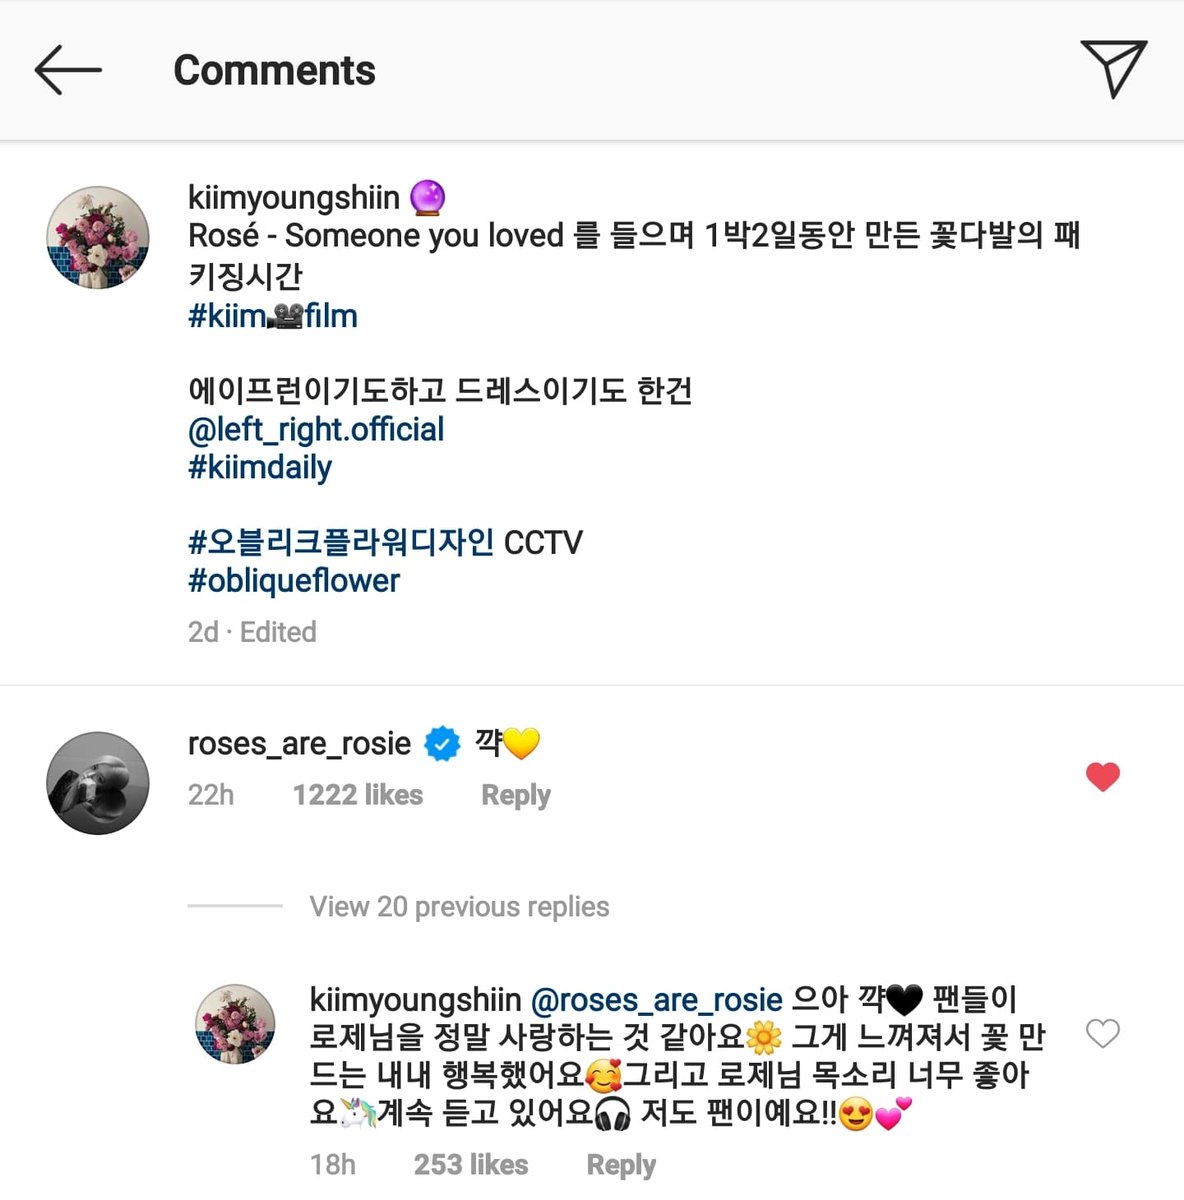 Rosé liked and commented on kimyoungshin (kiimyoungshiin) Instagram post

BLACKPINK WITH BLINKS
#MTVHottest BLACKPINK @BLACKPINK @ygofficialblink